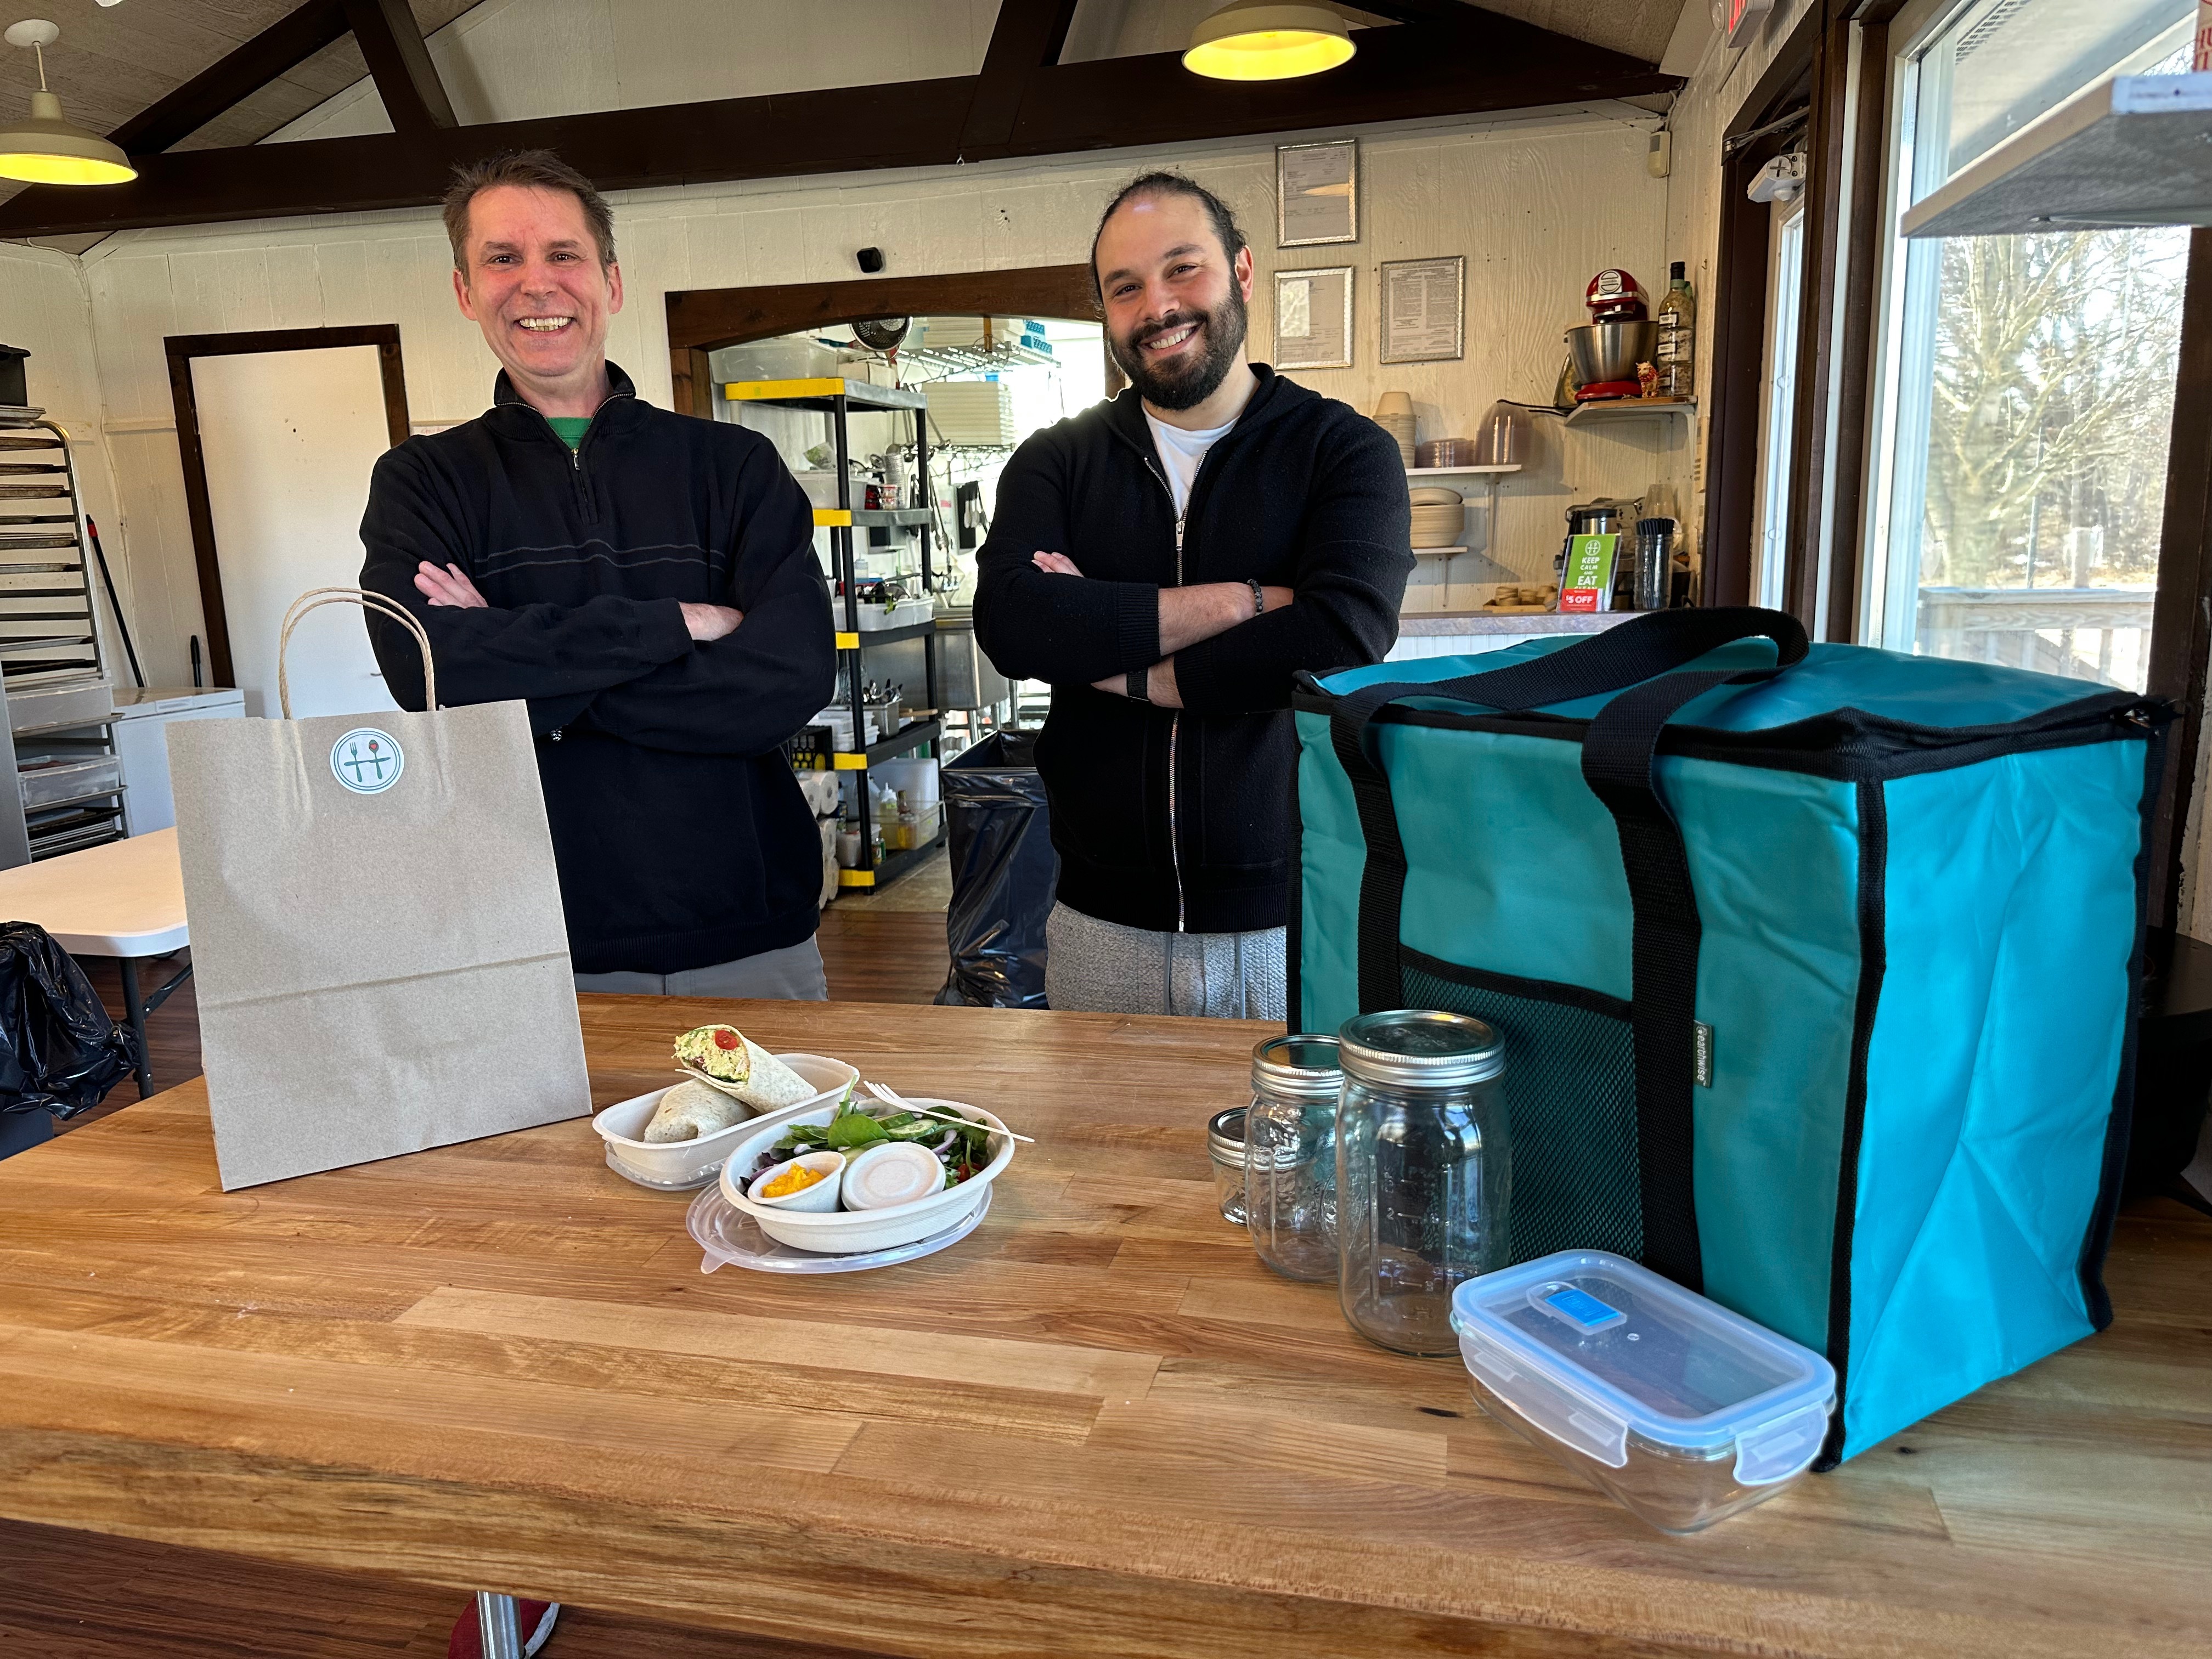 Chefs Jon Albrecht and Nick Reisini , co-owners of Honest Plate, in their Hampton Bays space with an order ready for delivery. ANNETTE HINKLE